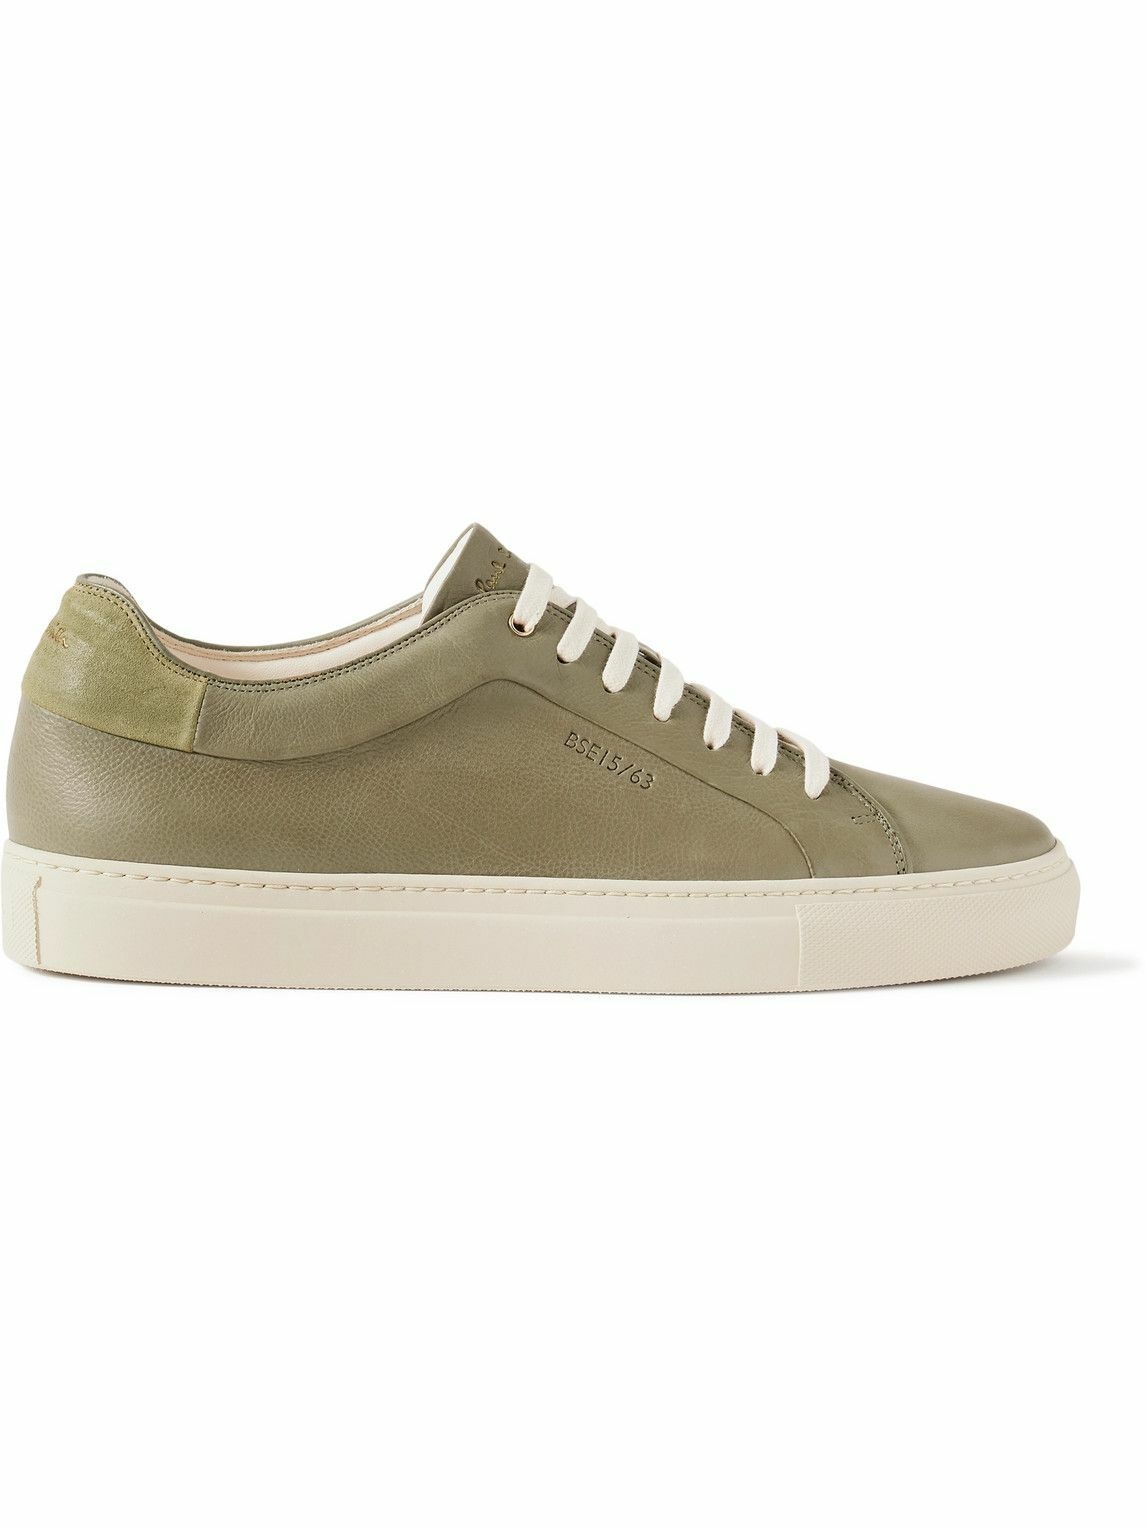 Paul Smith - Basso Suede-Trimmed ECO Leather Sneakers - Neutrals Paul Smith